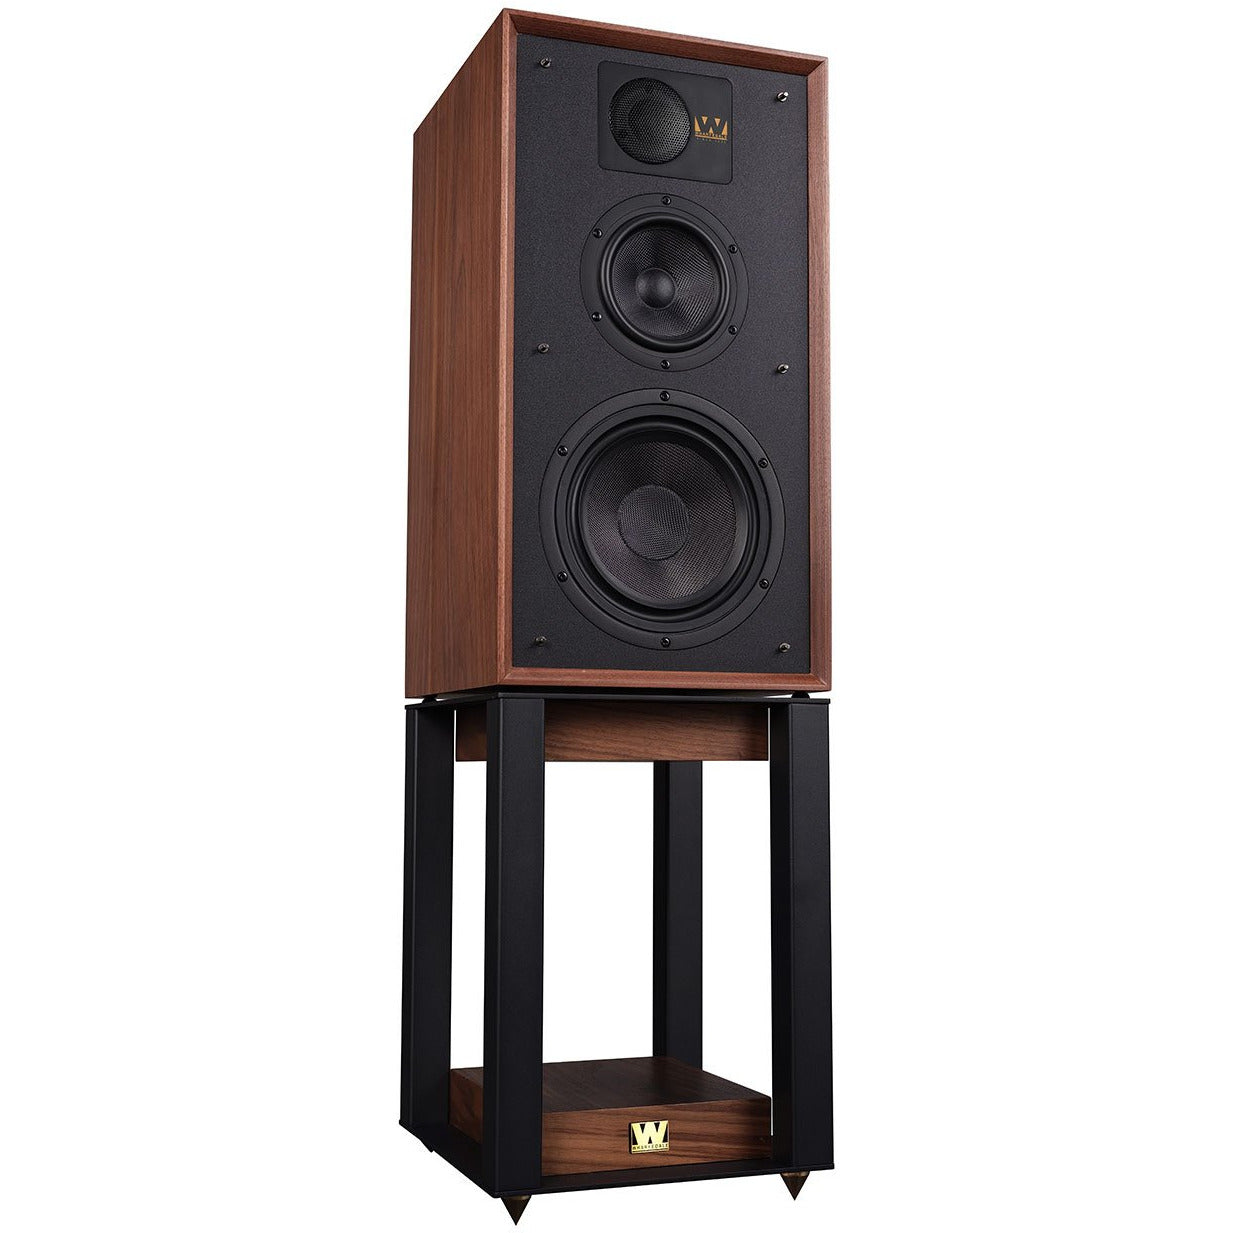 Wharfdale Linton Standmount Speakers with Stands